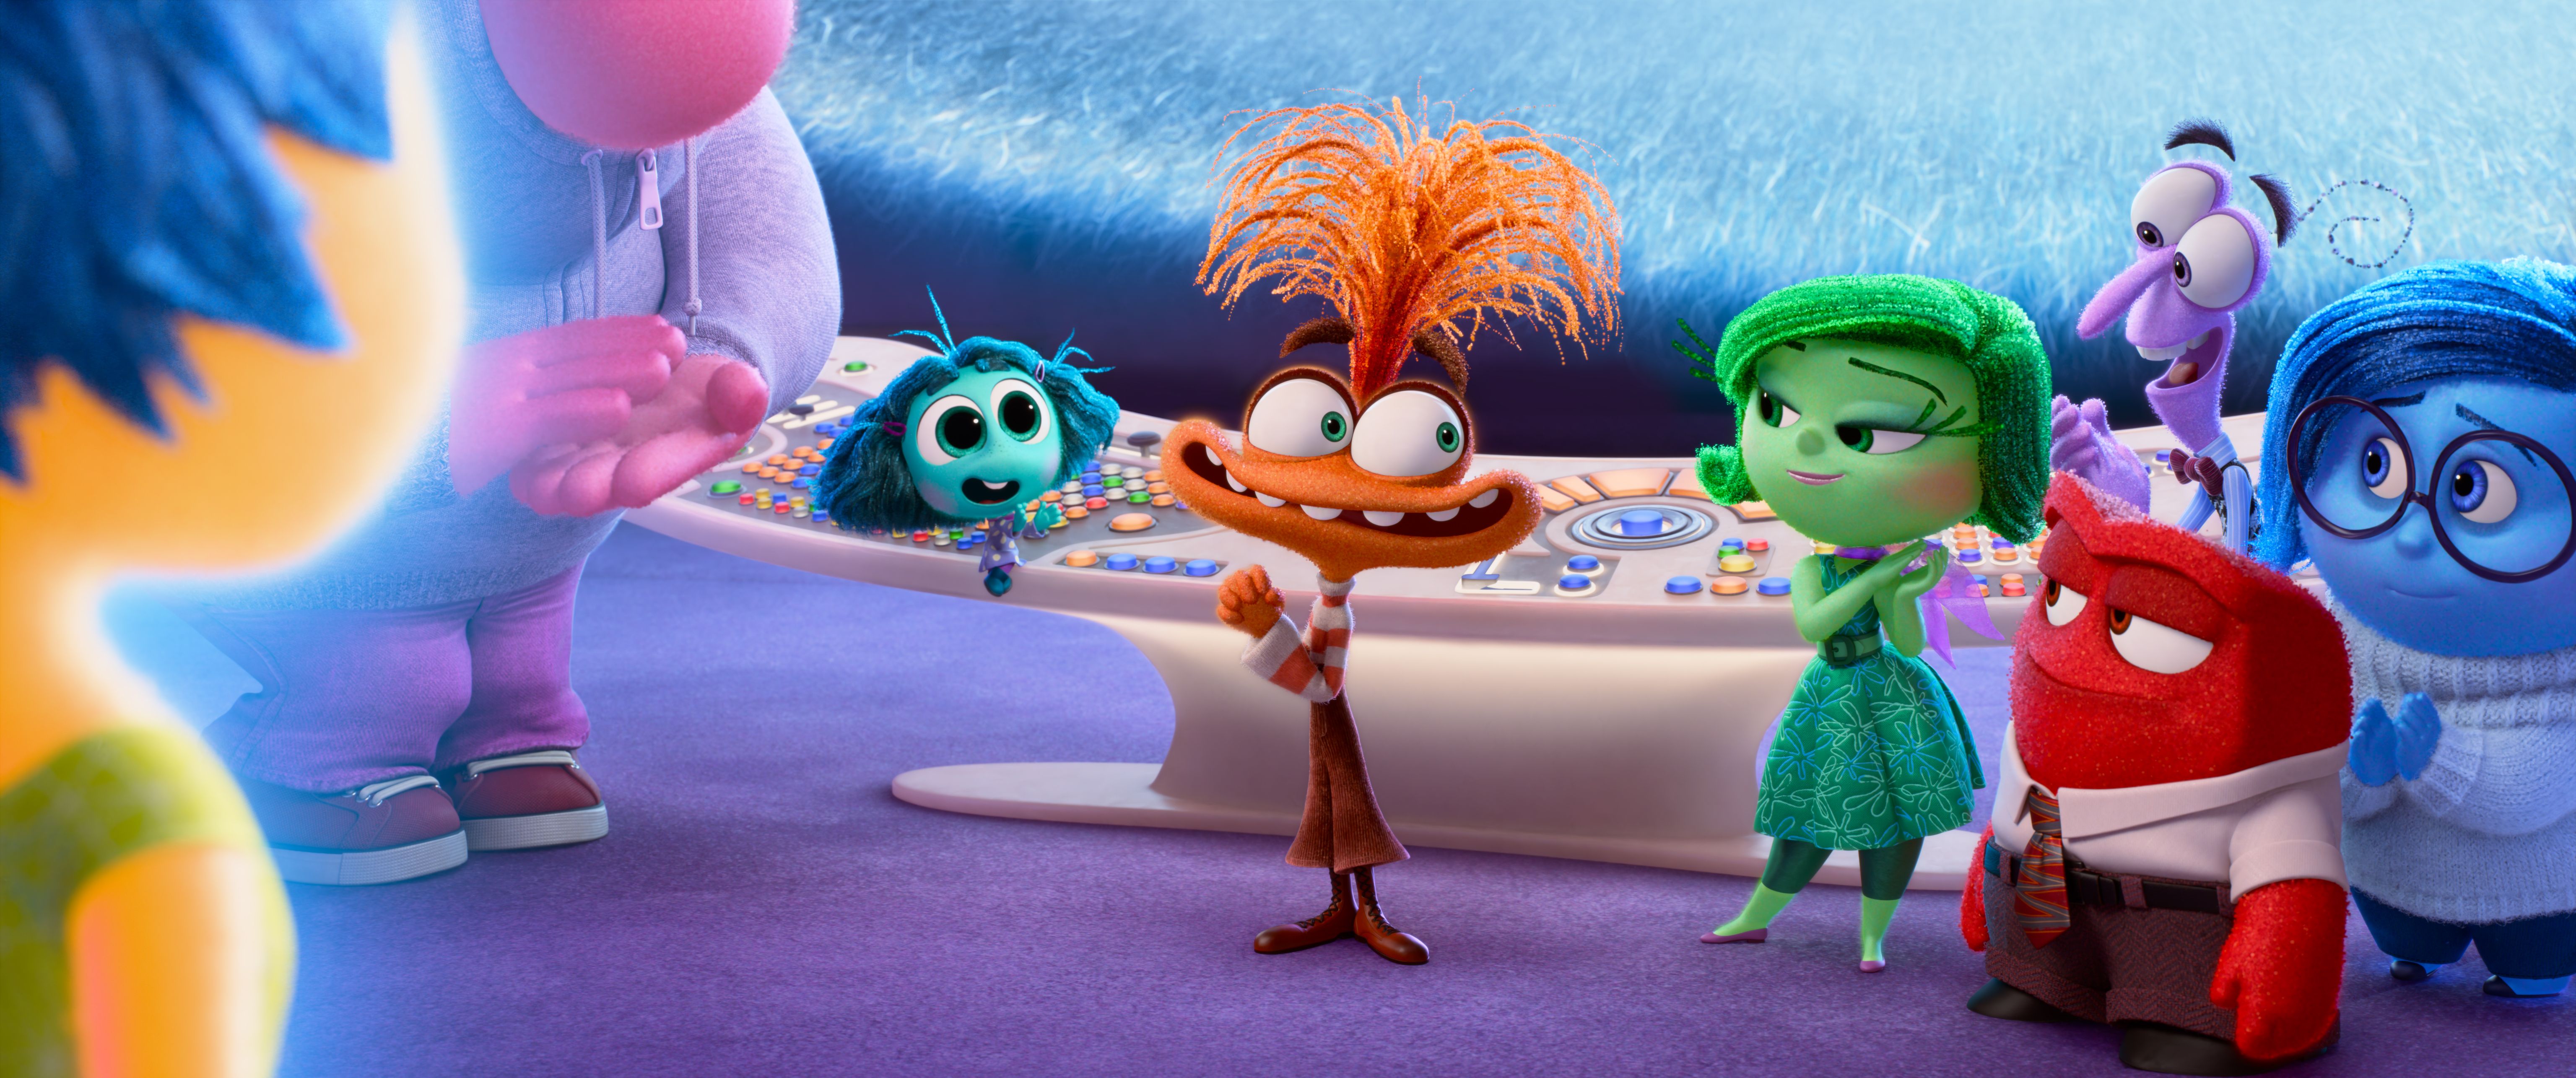 EXPANDED HEADQUARTERS -- Disney and Pixar’s “Inside Out 2” returns to the mind of newly minted teenager Riley, where headquarters expands to make room for new Emotions. Pictured from L-R: Joy (voice of Amy Poehler), Embarrassment (voice of Paul Walter Hauser), Envy (voice of Ayo Edebiri), Anxiety (voice of Maya Hawke), Disgust (voice of Liza Lapira), Anger (voice of Lewis Black), Fear (voice of Tony Hale) and Sadness (voice of Phyllis Smith). Directed by Kelsey Mann and produced by Mark Nielsen, “Inside Out 2” releases only in theaters June 14, 2024. © 2024 Disney/Pixar. All Rights Reserved.